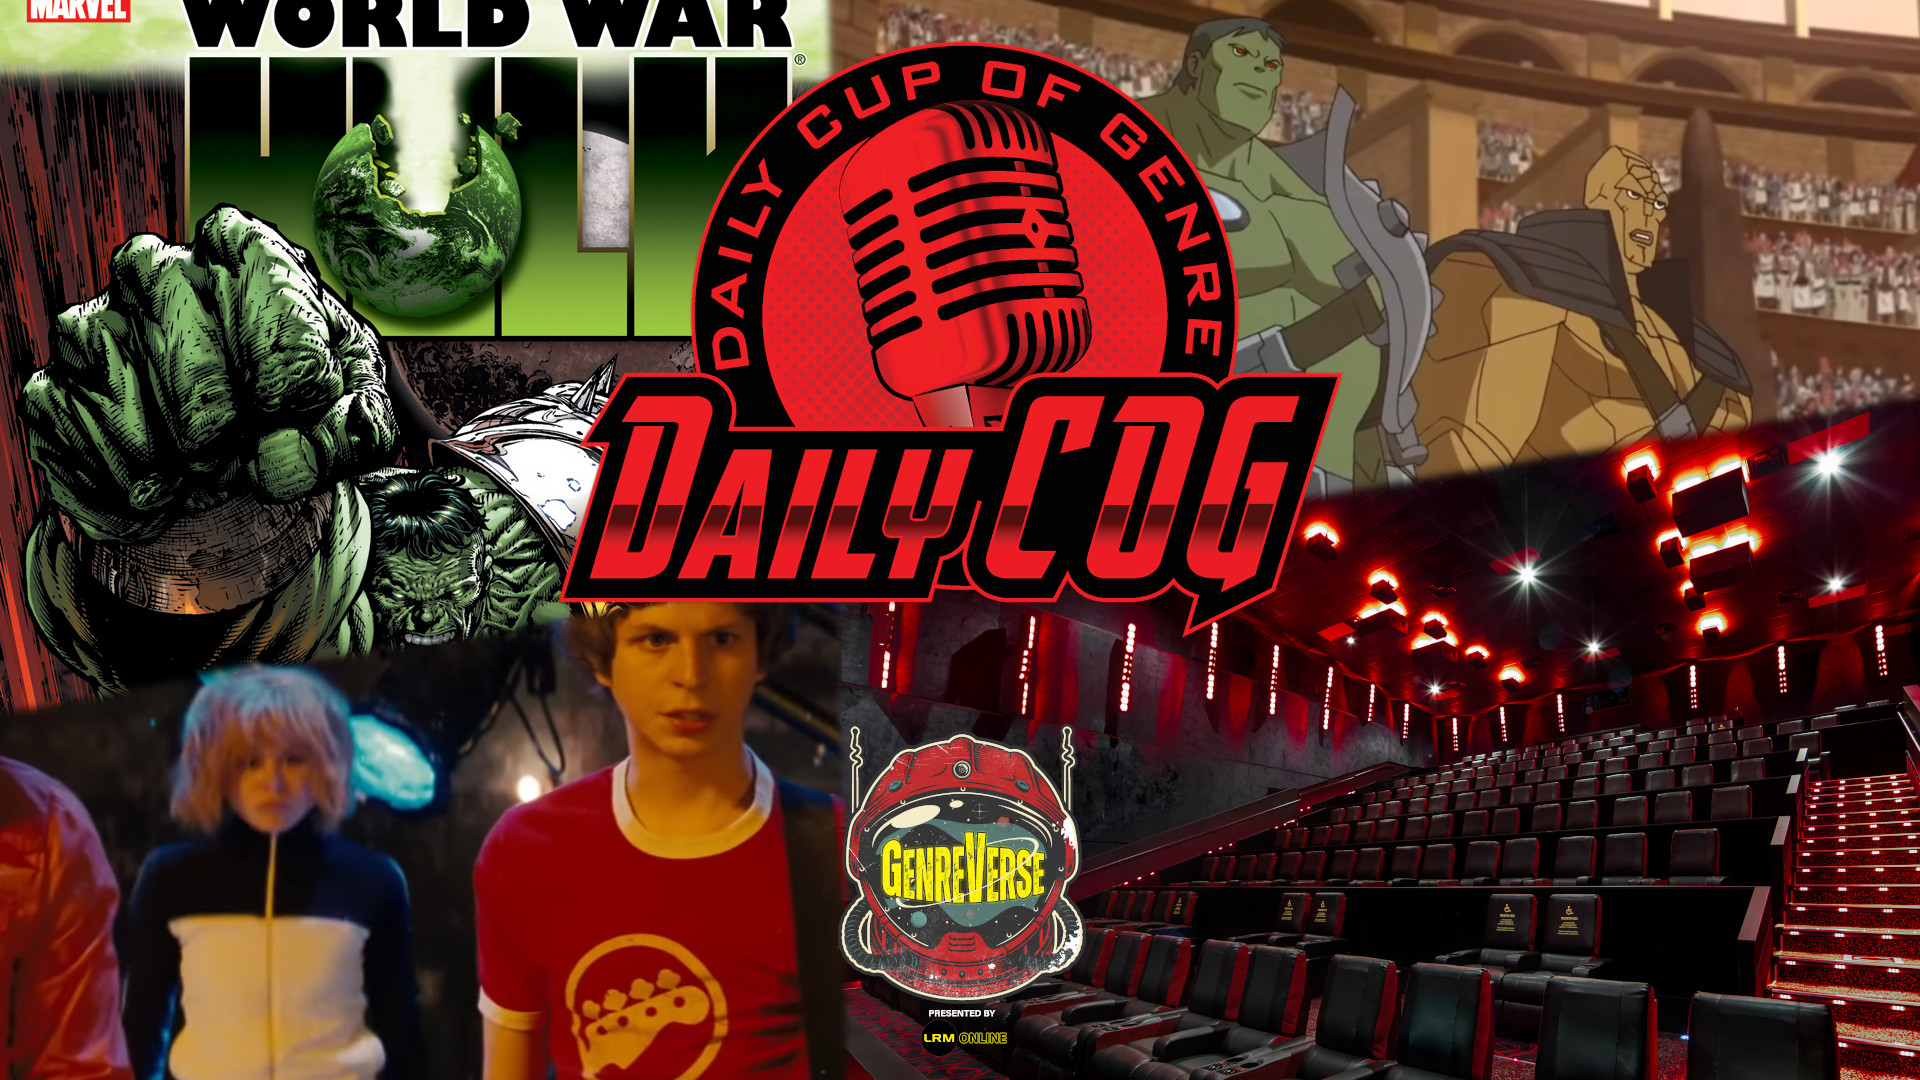 Weekend Box Office Numbers, A Scott Pilgrim Anime Is Possibly Coming, And Planet Hulk & World War Hulk Rumors Daily COG Video Mix Down